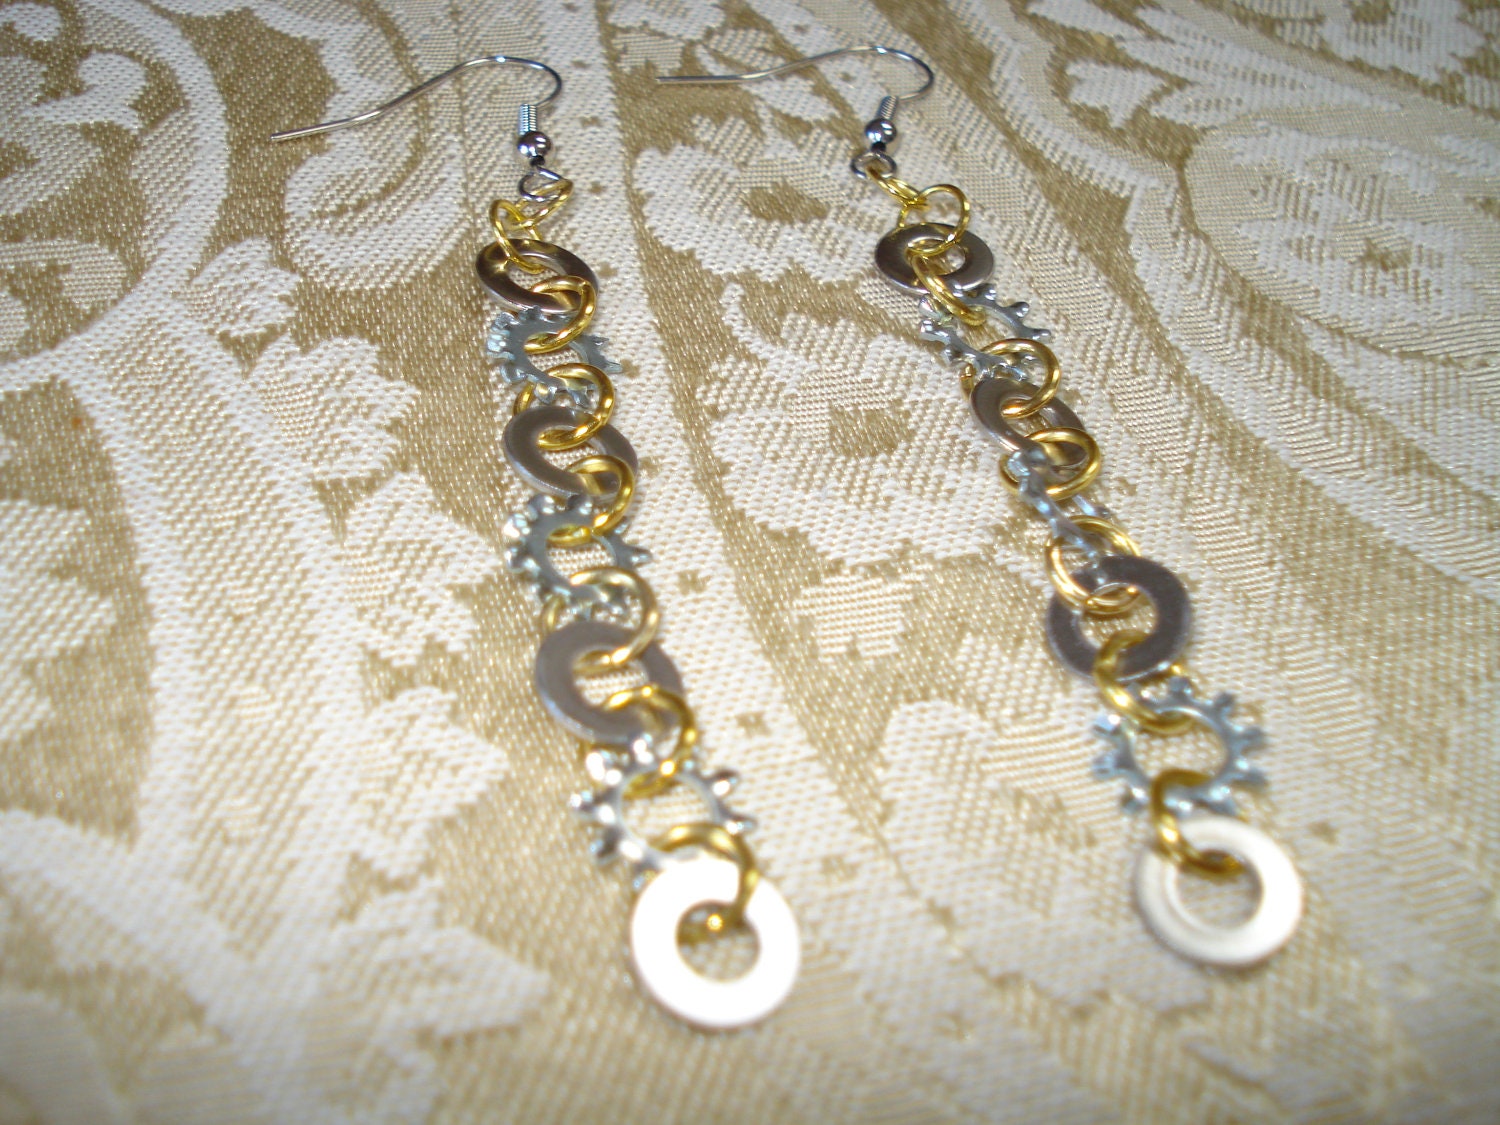 Steampunk style Lock Washer and Smoothe Washer Dangle Earrings